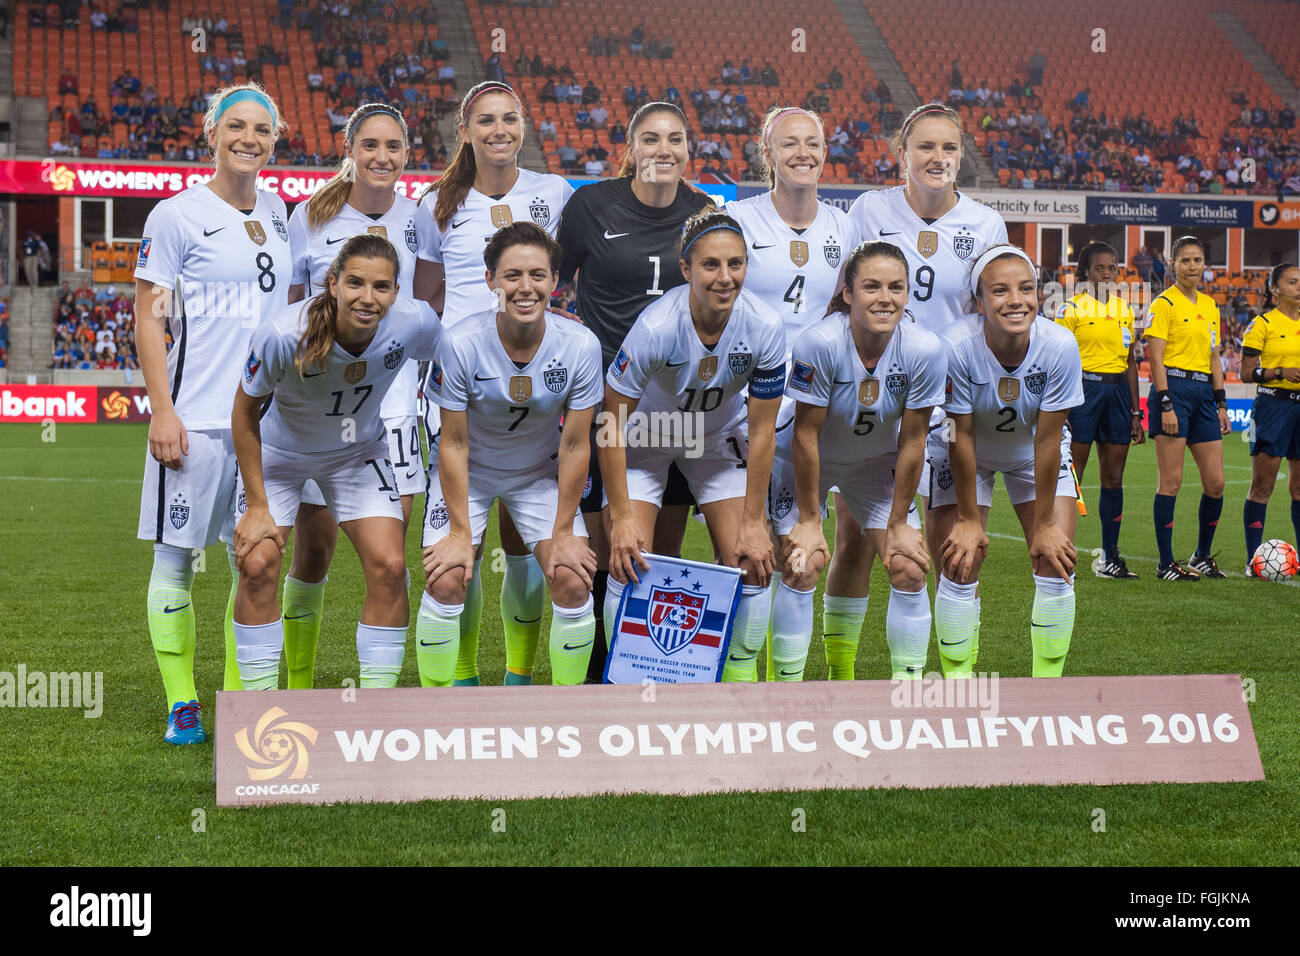 Houston, Texas, USA. 19th February, 2016. February 19, 2016: The team USA starting lineup poses for a group shot prior to a semi-final CONCACAF Olympic Qualifying soccer match between the USA and Trinidad & Tobago at BBVA Compass Stadium in Houston, TX. USA won 5-0 and earned a spot in the Summer Olympics.Trask Smith/CSM Credit:  Cal Sport Media/Alamy Live News Stock Photo